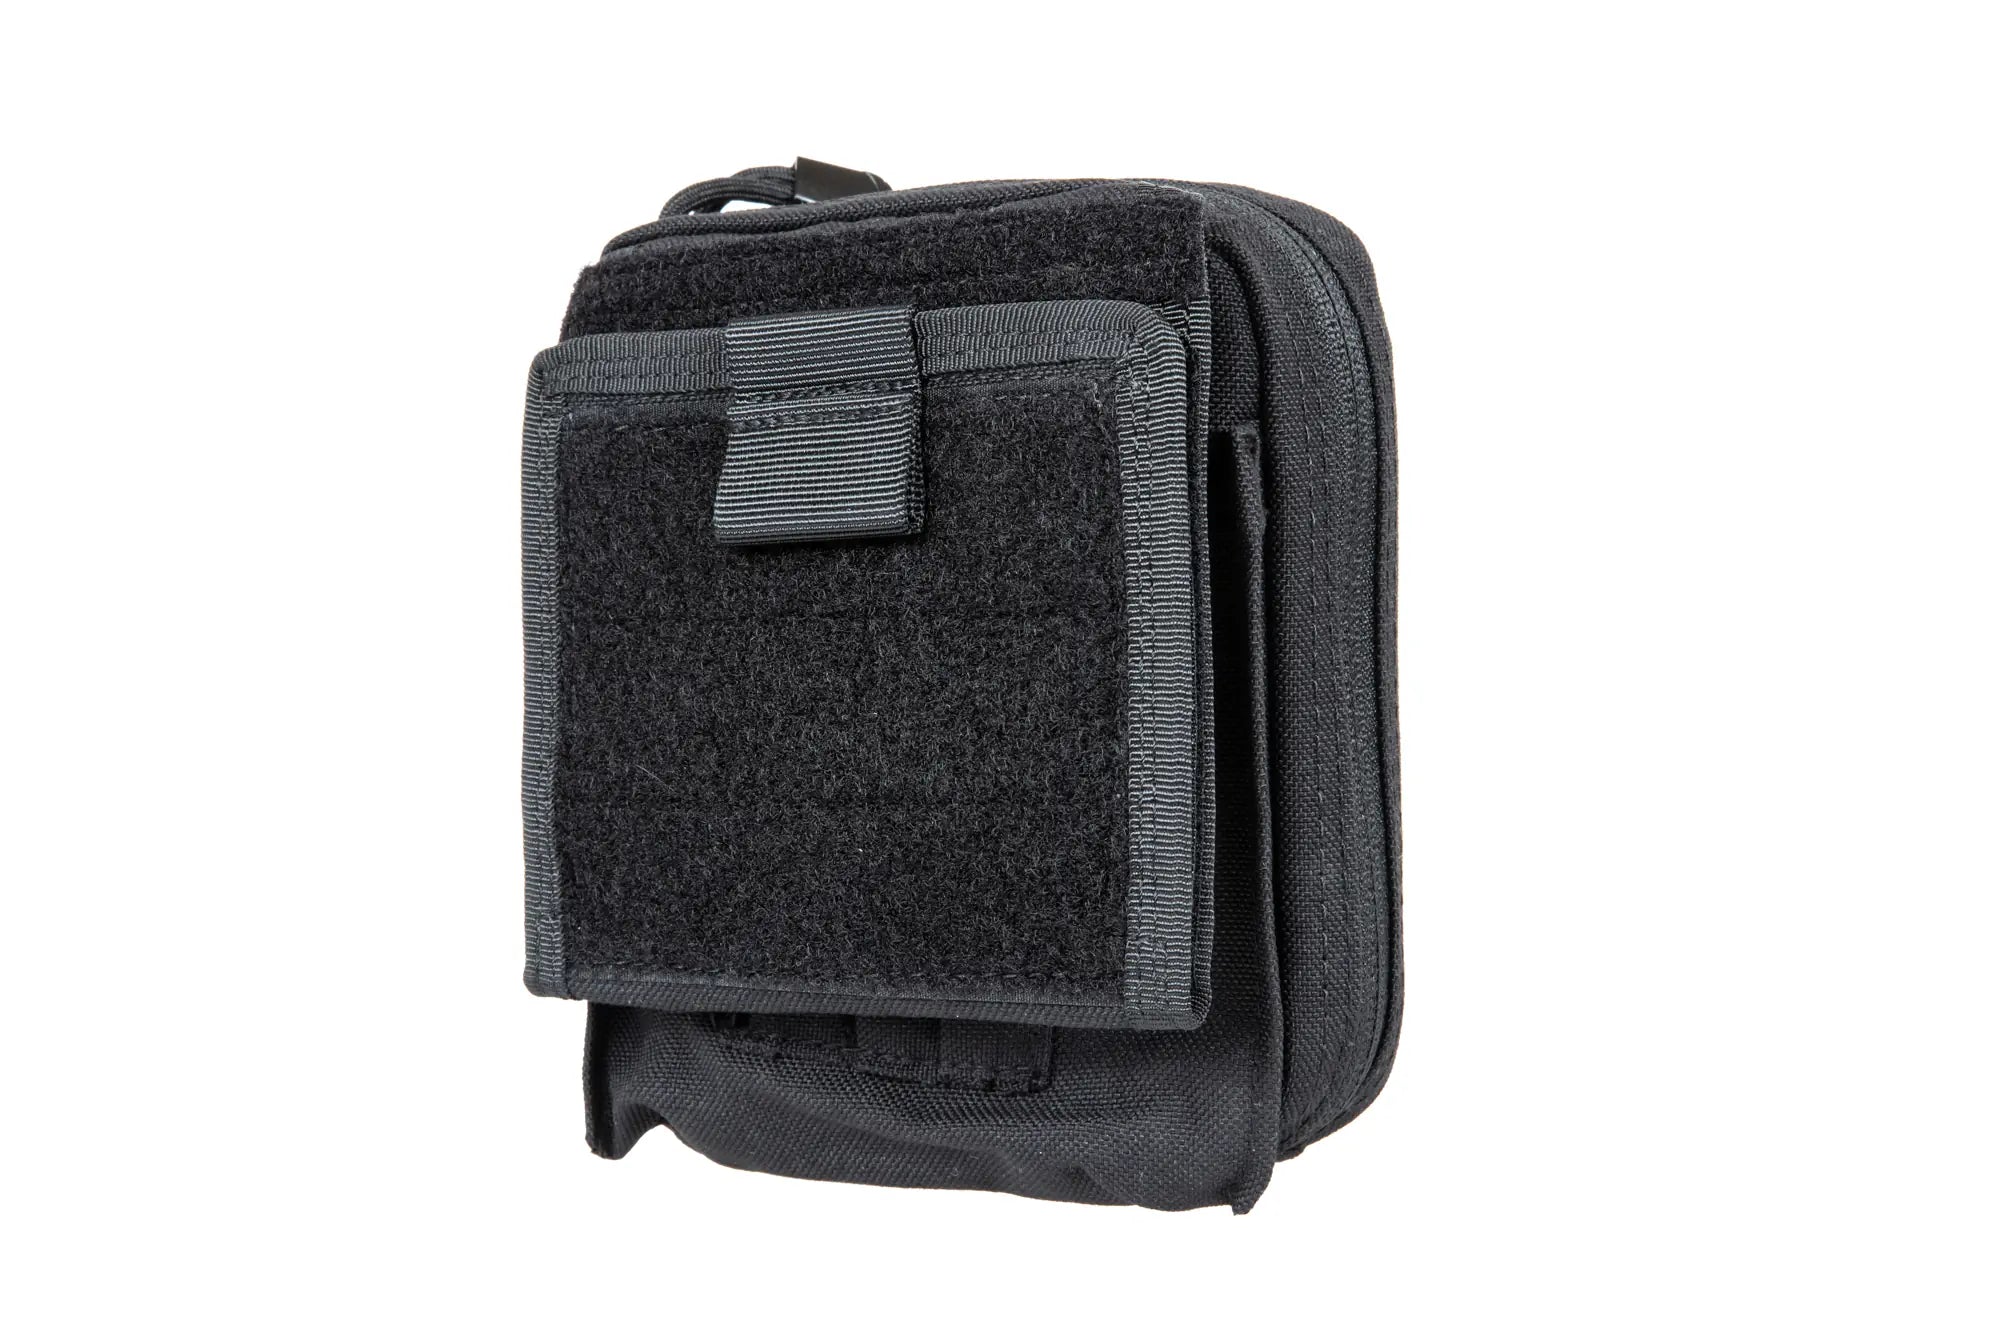 Administrative Panel with Map Pouch - Black